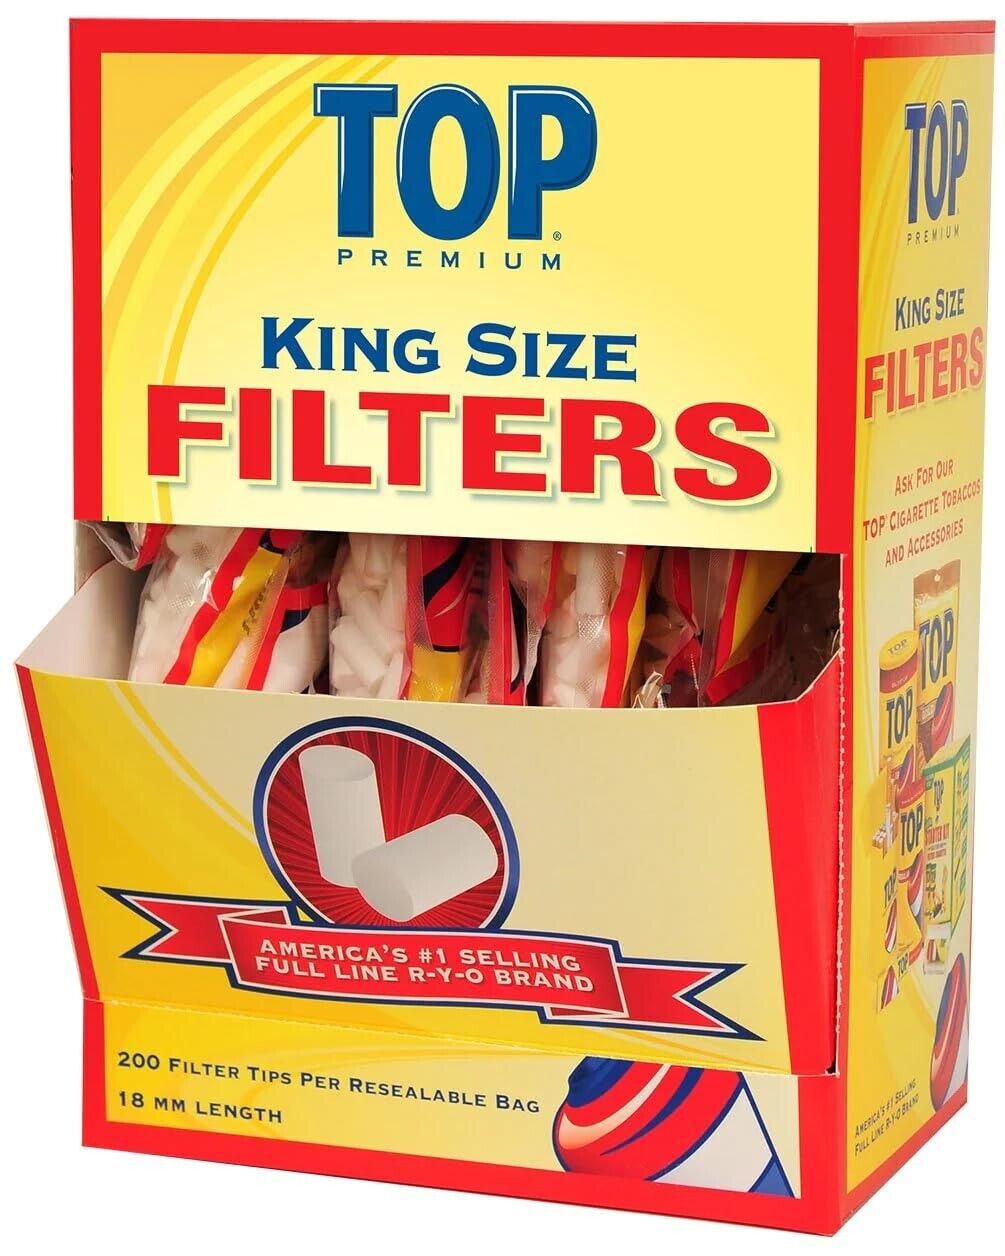 New Top King Size 18 mm Filter Tips 200 Filters per Bag 16 Count